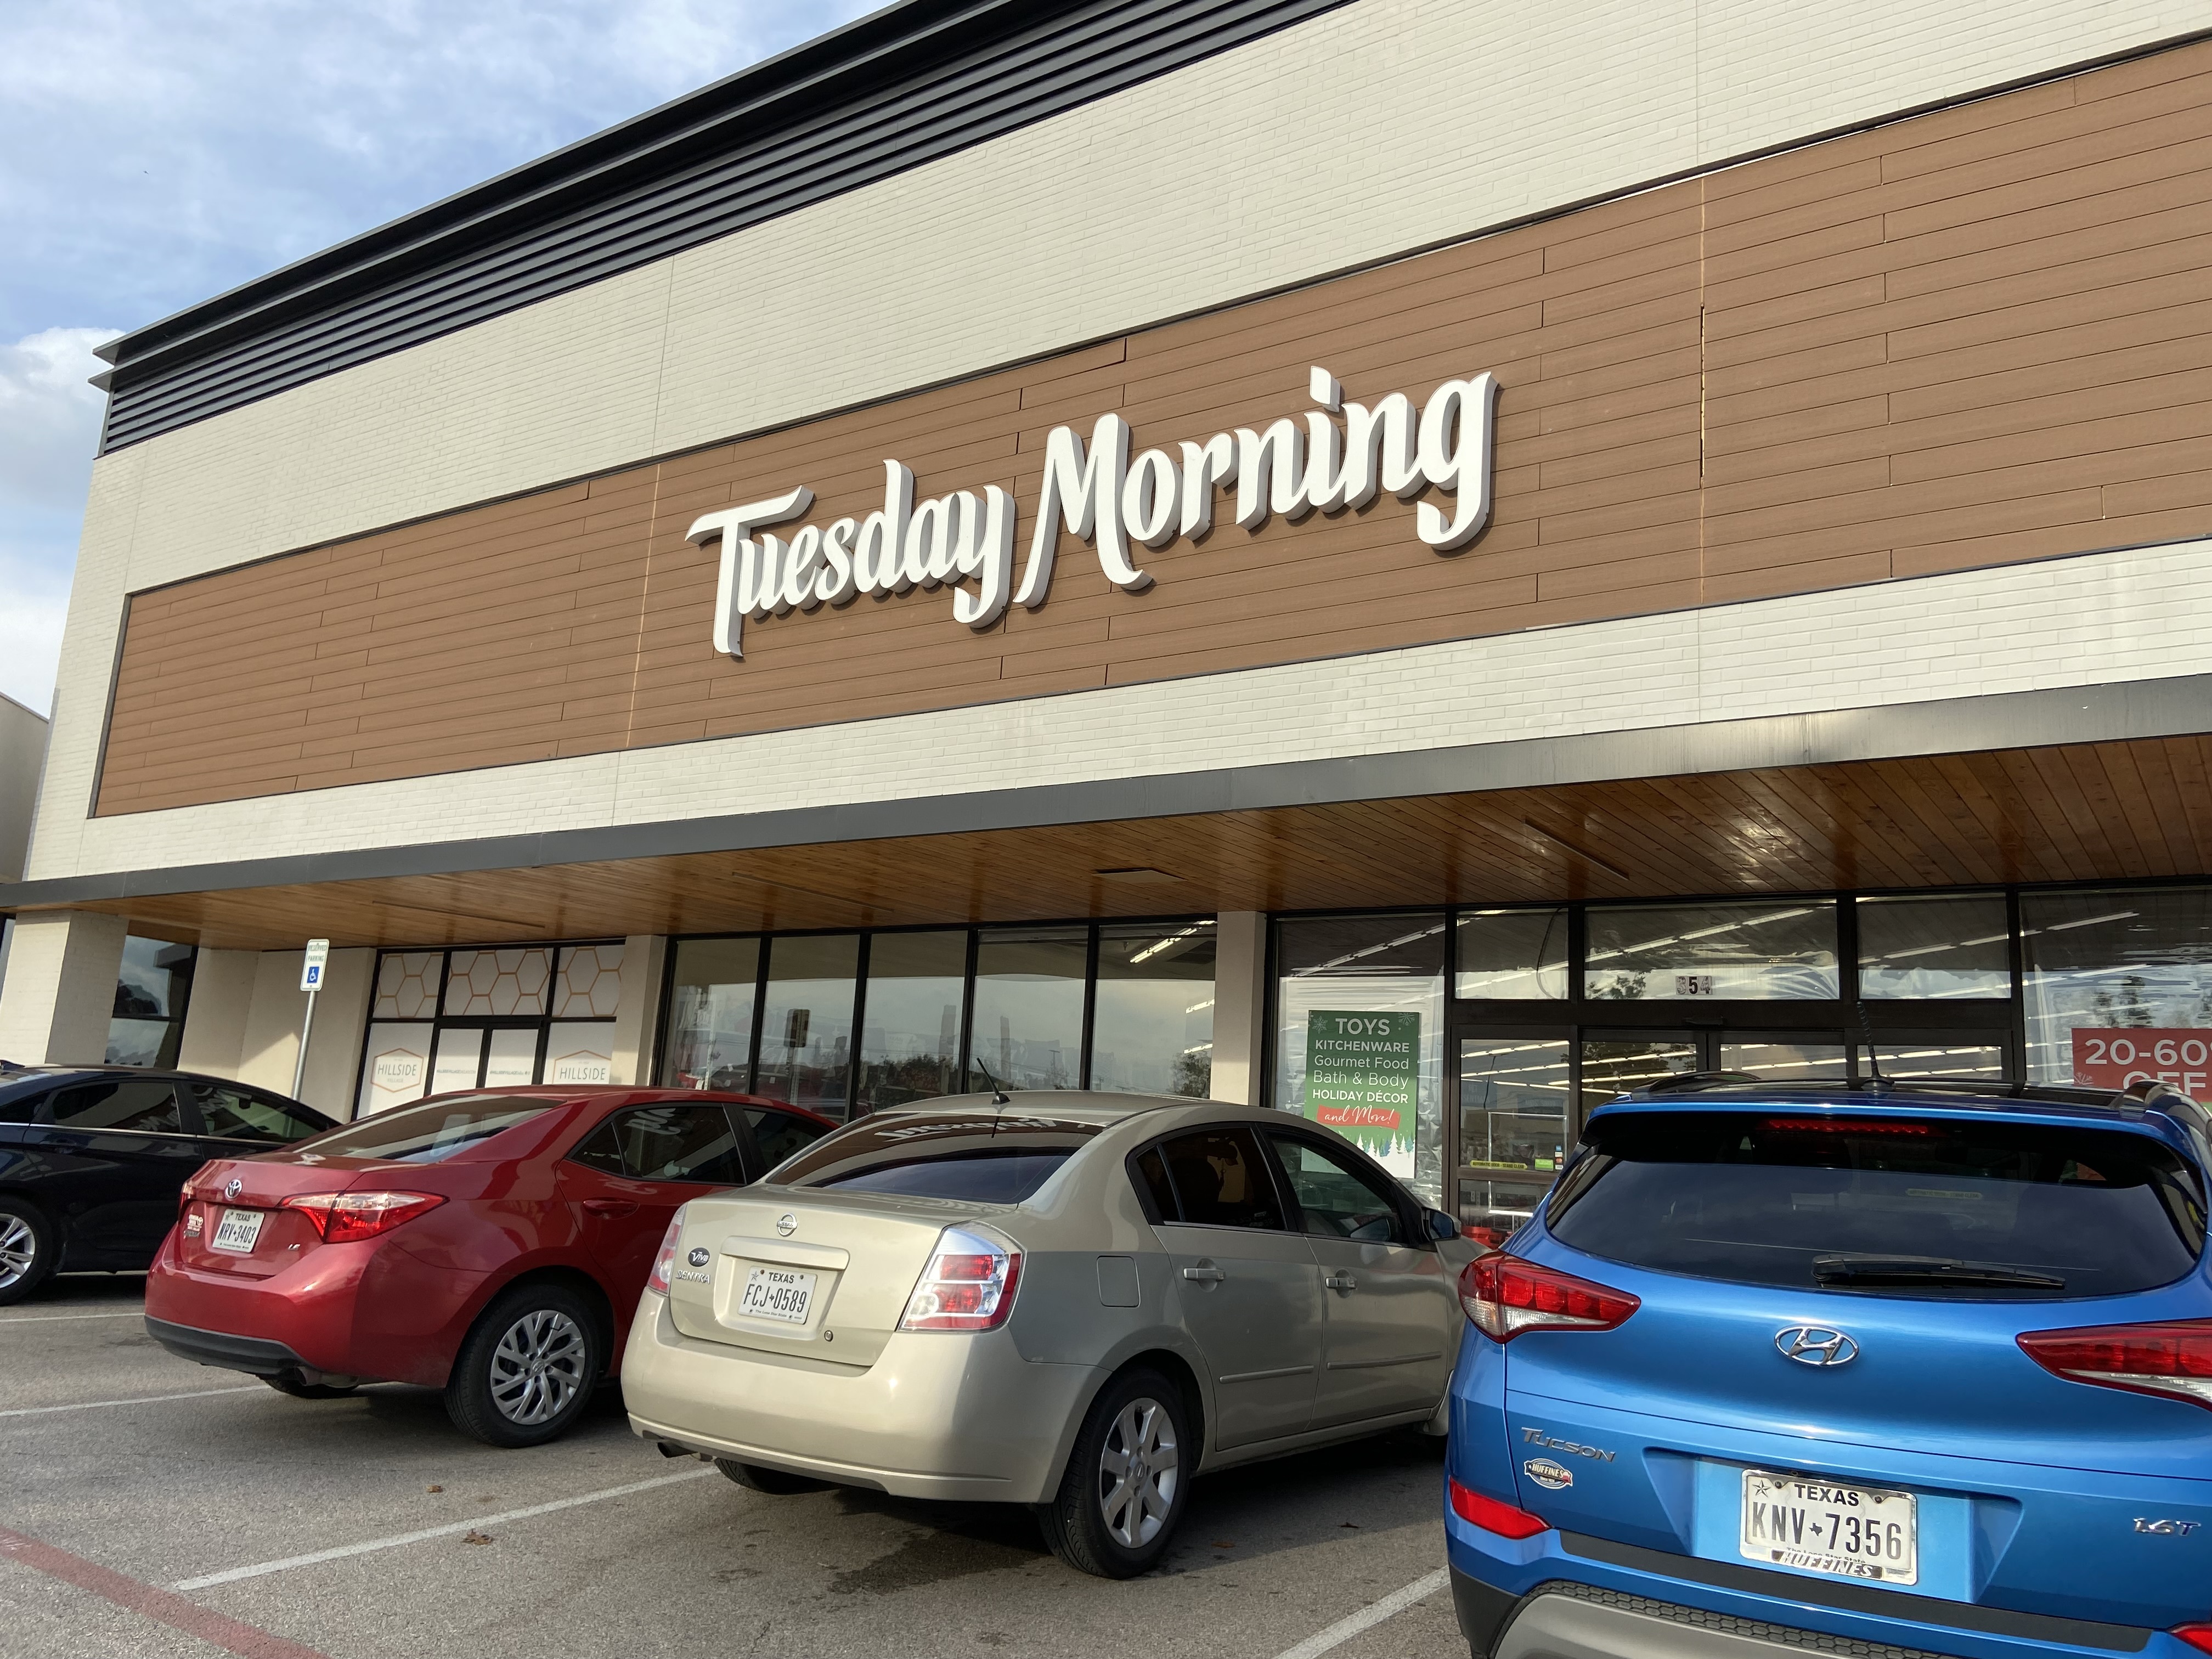 San Angelo Tuesday Morning closing July 1, sales going on now